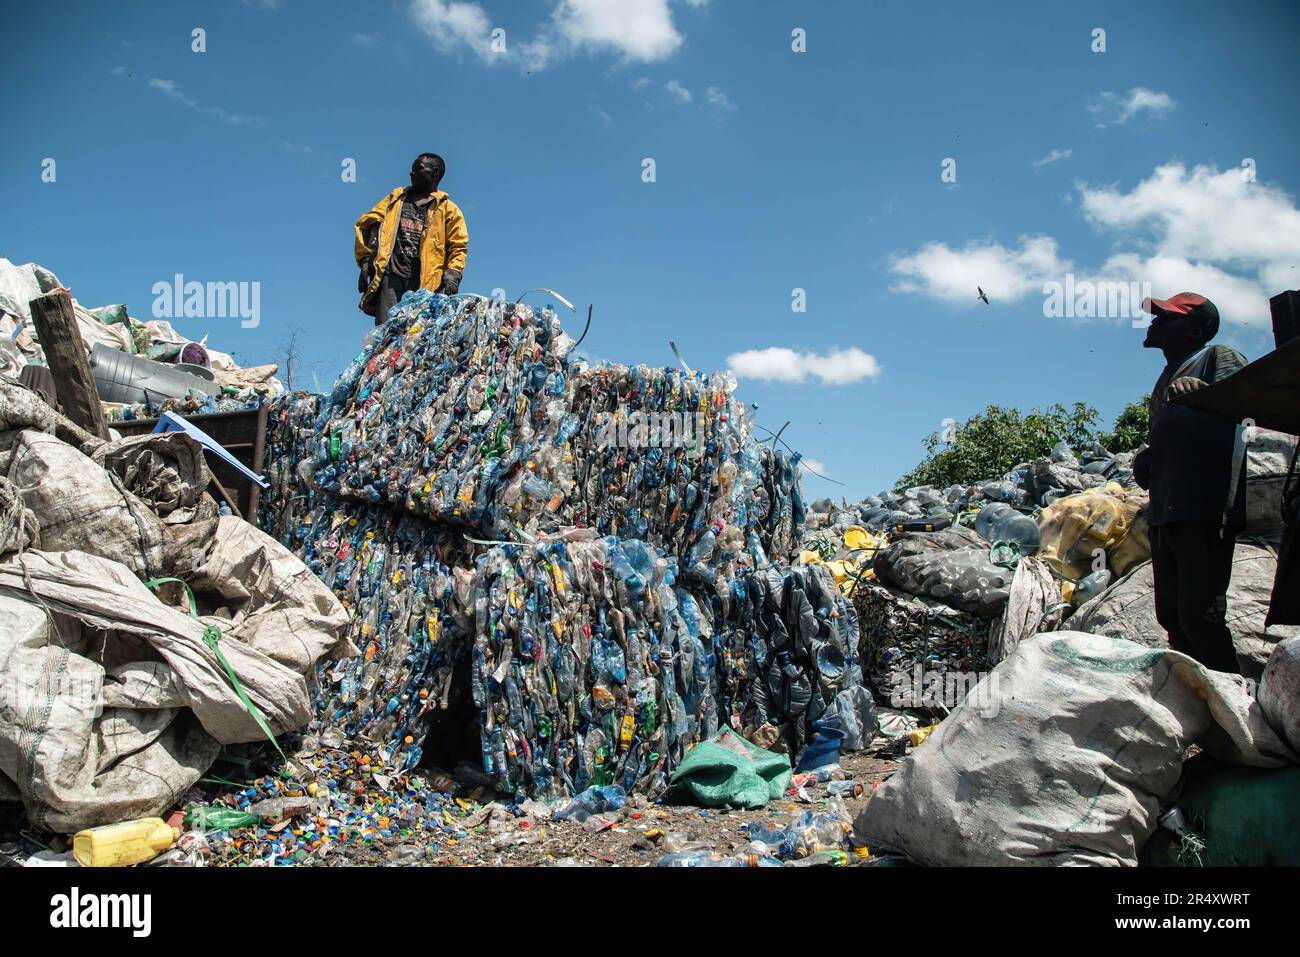 A worker arranges bales of plastic at a recycling plant in Nakuru. Negotiators have gathered in Paris, France for the second round of deliberations to develop a global treaty aimed at tackling the escalating issue of plastic pollution. According to a recent report by the United Nations Environment Programme (UNEP), countries have the potential to reduce plastic pollution by 80% by 2040 by eliminating unnecessary plastics, implementing recycling and reuse strategies, introducing deposit return schemes, and substituting plastic with sustainable alternative materials. (Photo by James Wakibia/SO Stock Photo